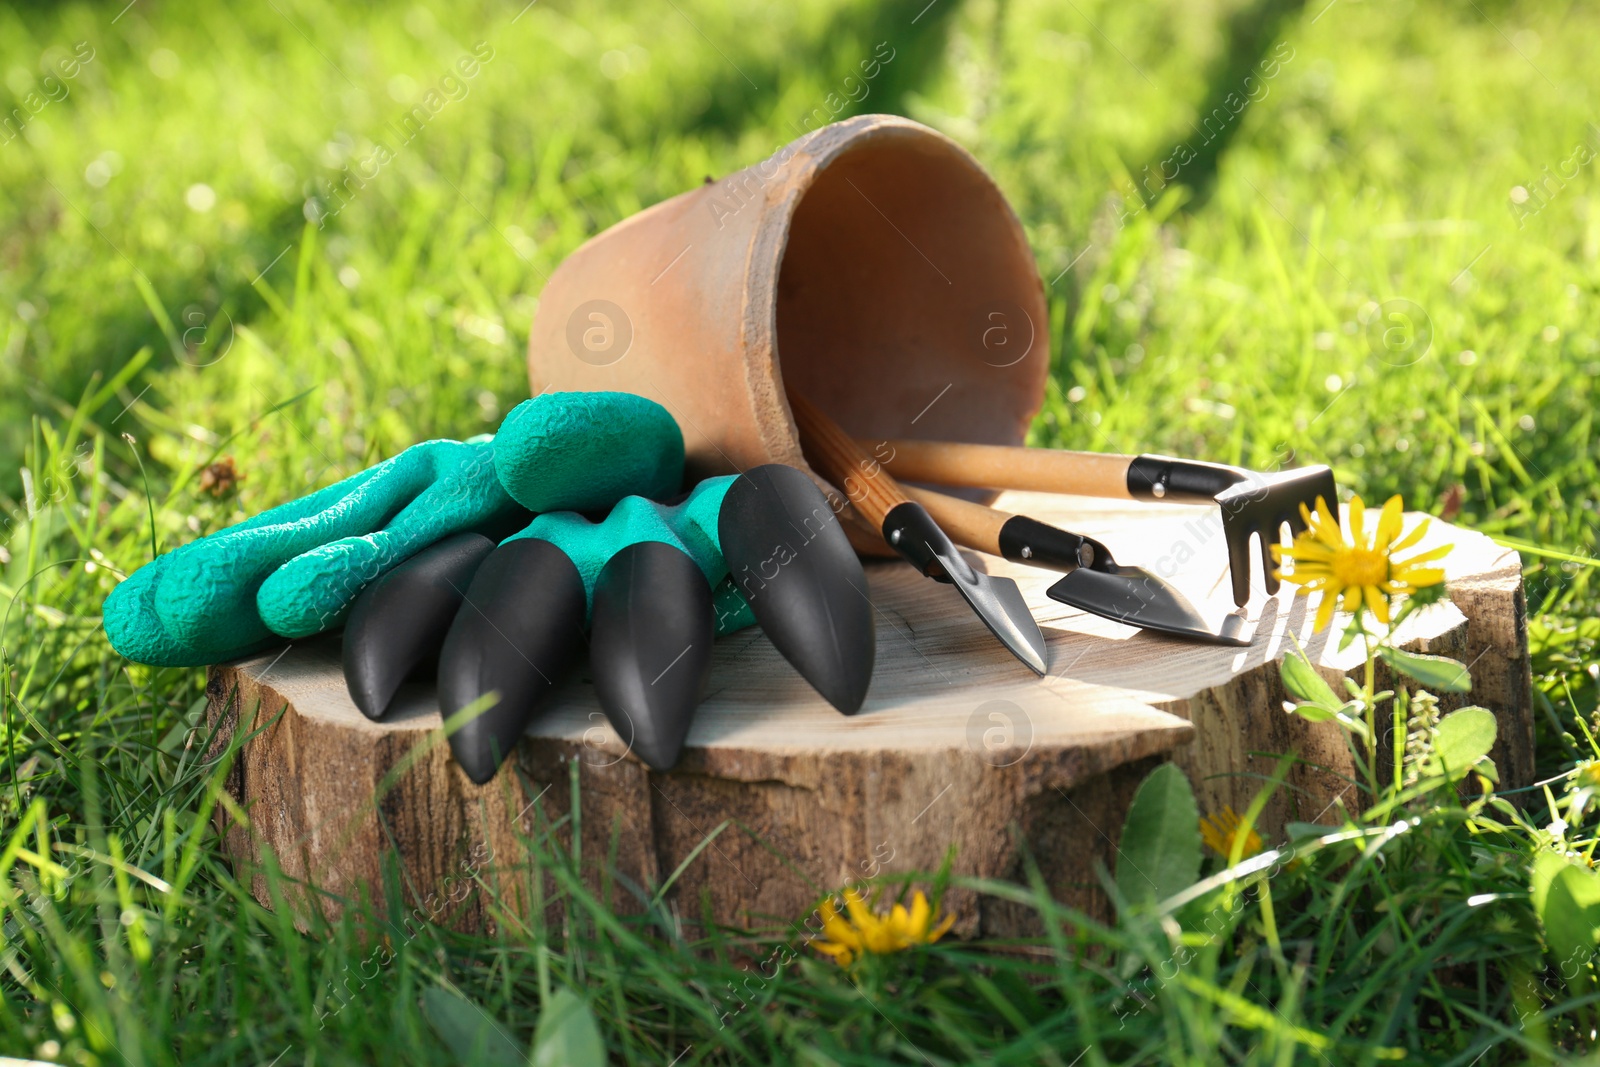 Photo of Pair of gloves and pot with gardening tools on wooden stump among grass outdoors